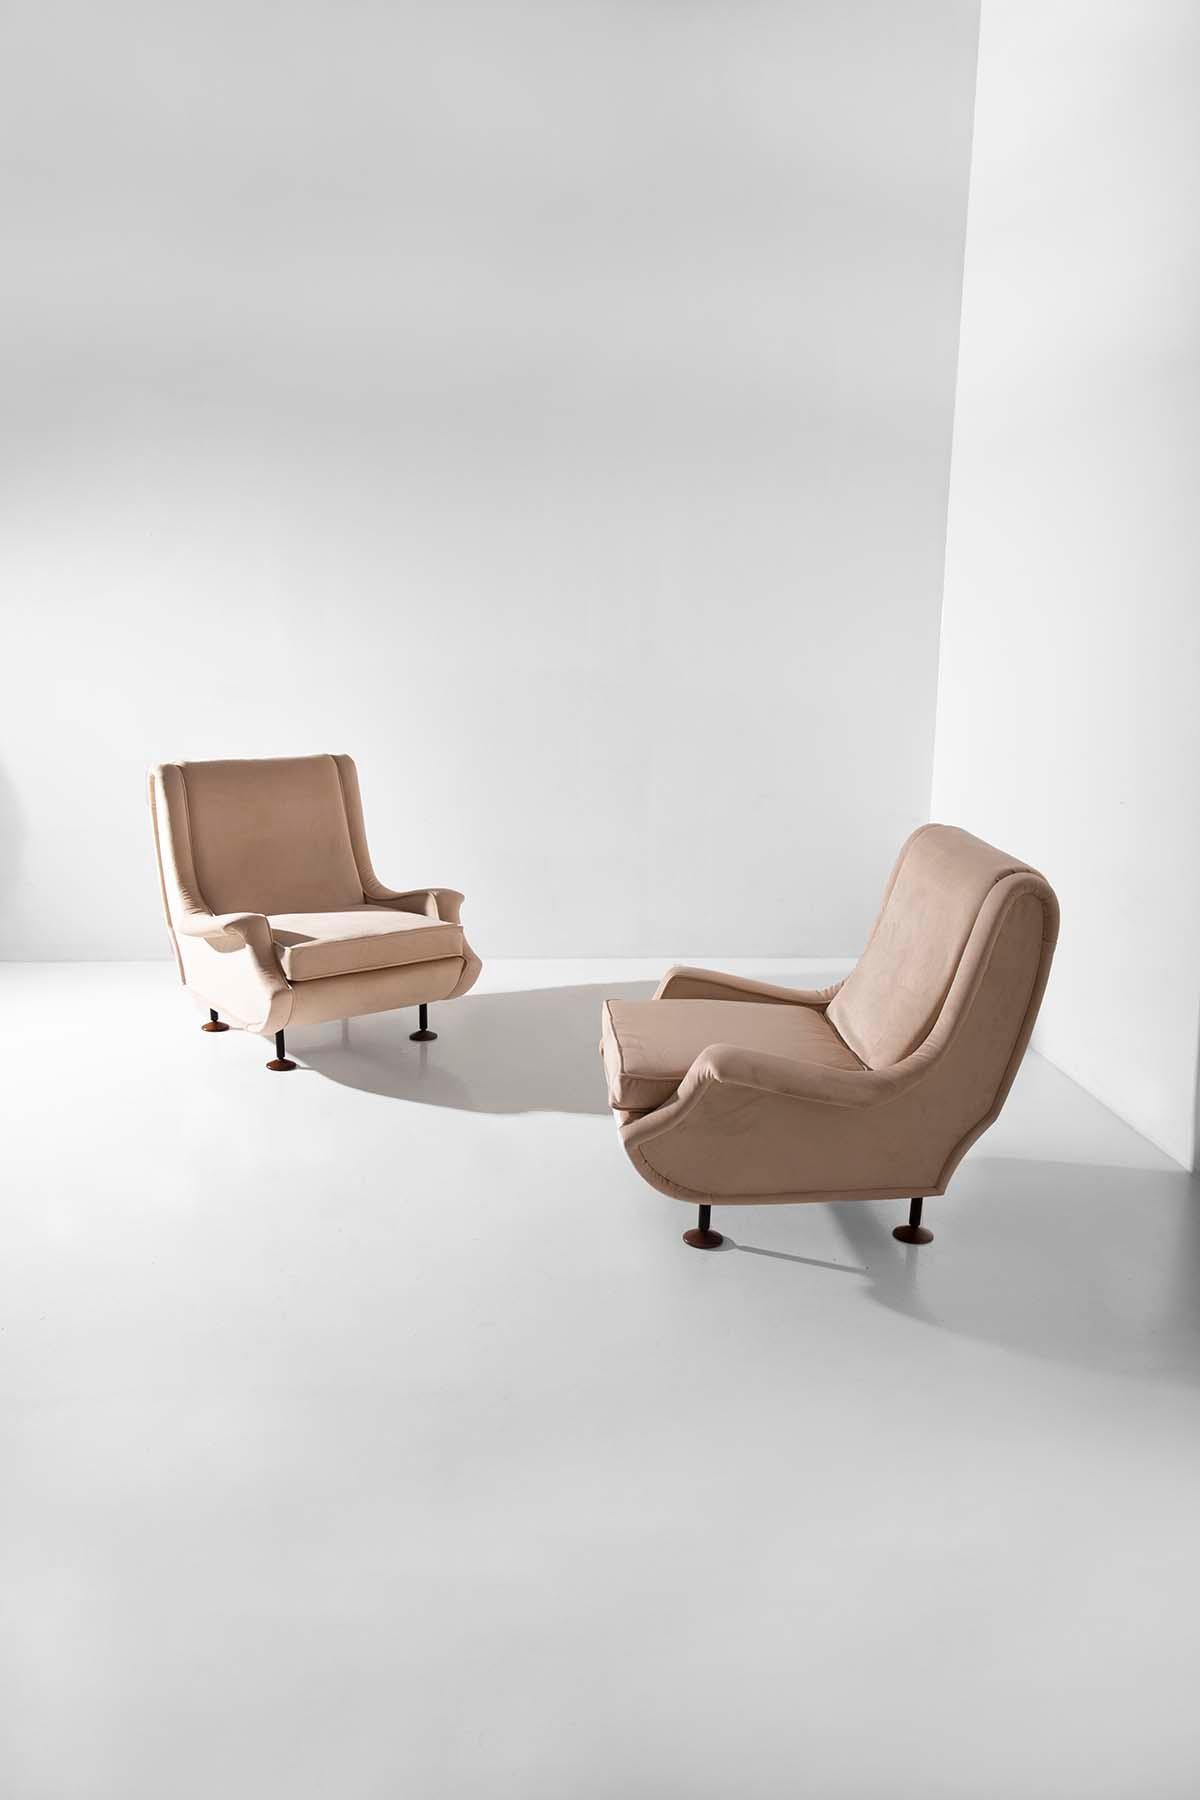 A Splendid Pair of Vintage Beige Velvet Armchairs by Marco Zanuso for Arflex: Timeless Elegance
When it comes to interior design and furnishing, the timeless allure of vintage furniture pieces cannot be overstated. In this article, we are delighted